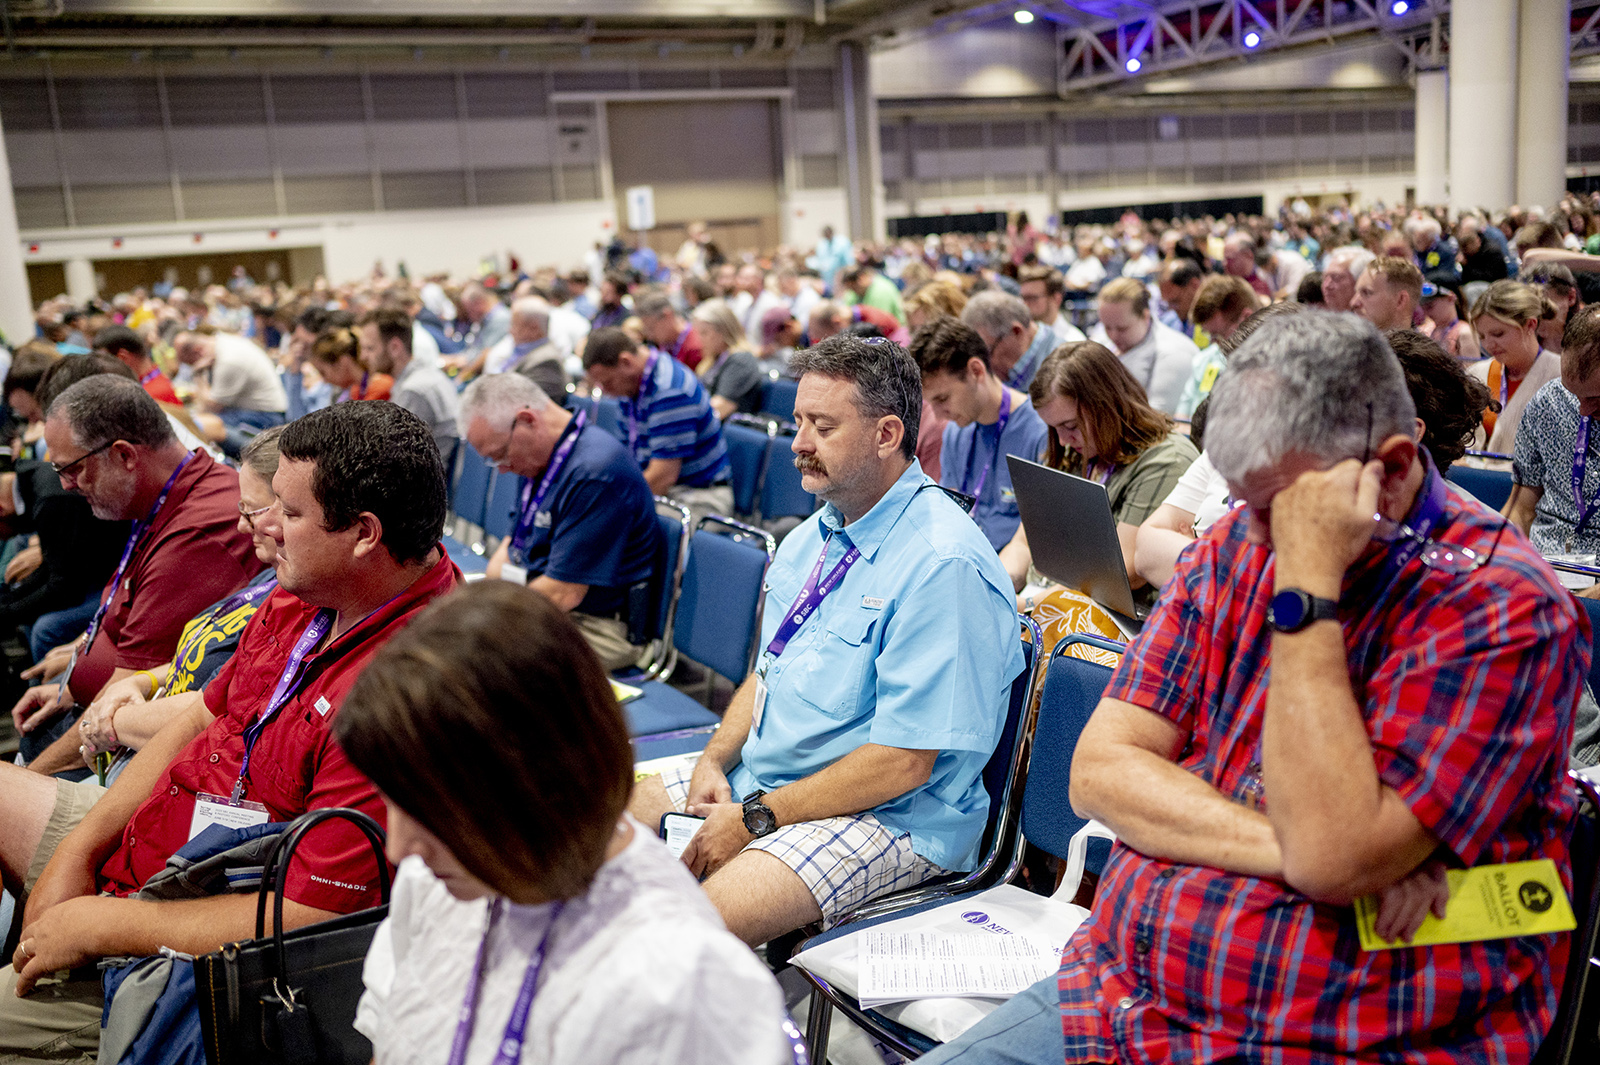 Messengers attend the Southern Baptist Convention annual meeting at the Ernest N. Morial Convention Center in New Orleans, Wednesday, June 14, 2023. RNS photo by Emily Kask